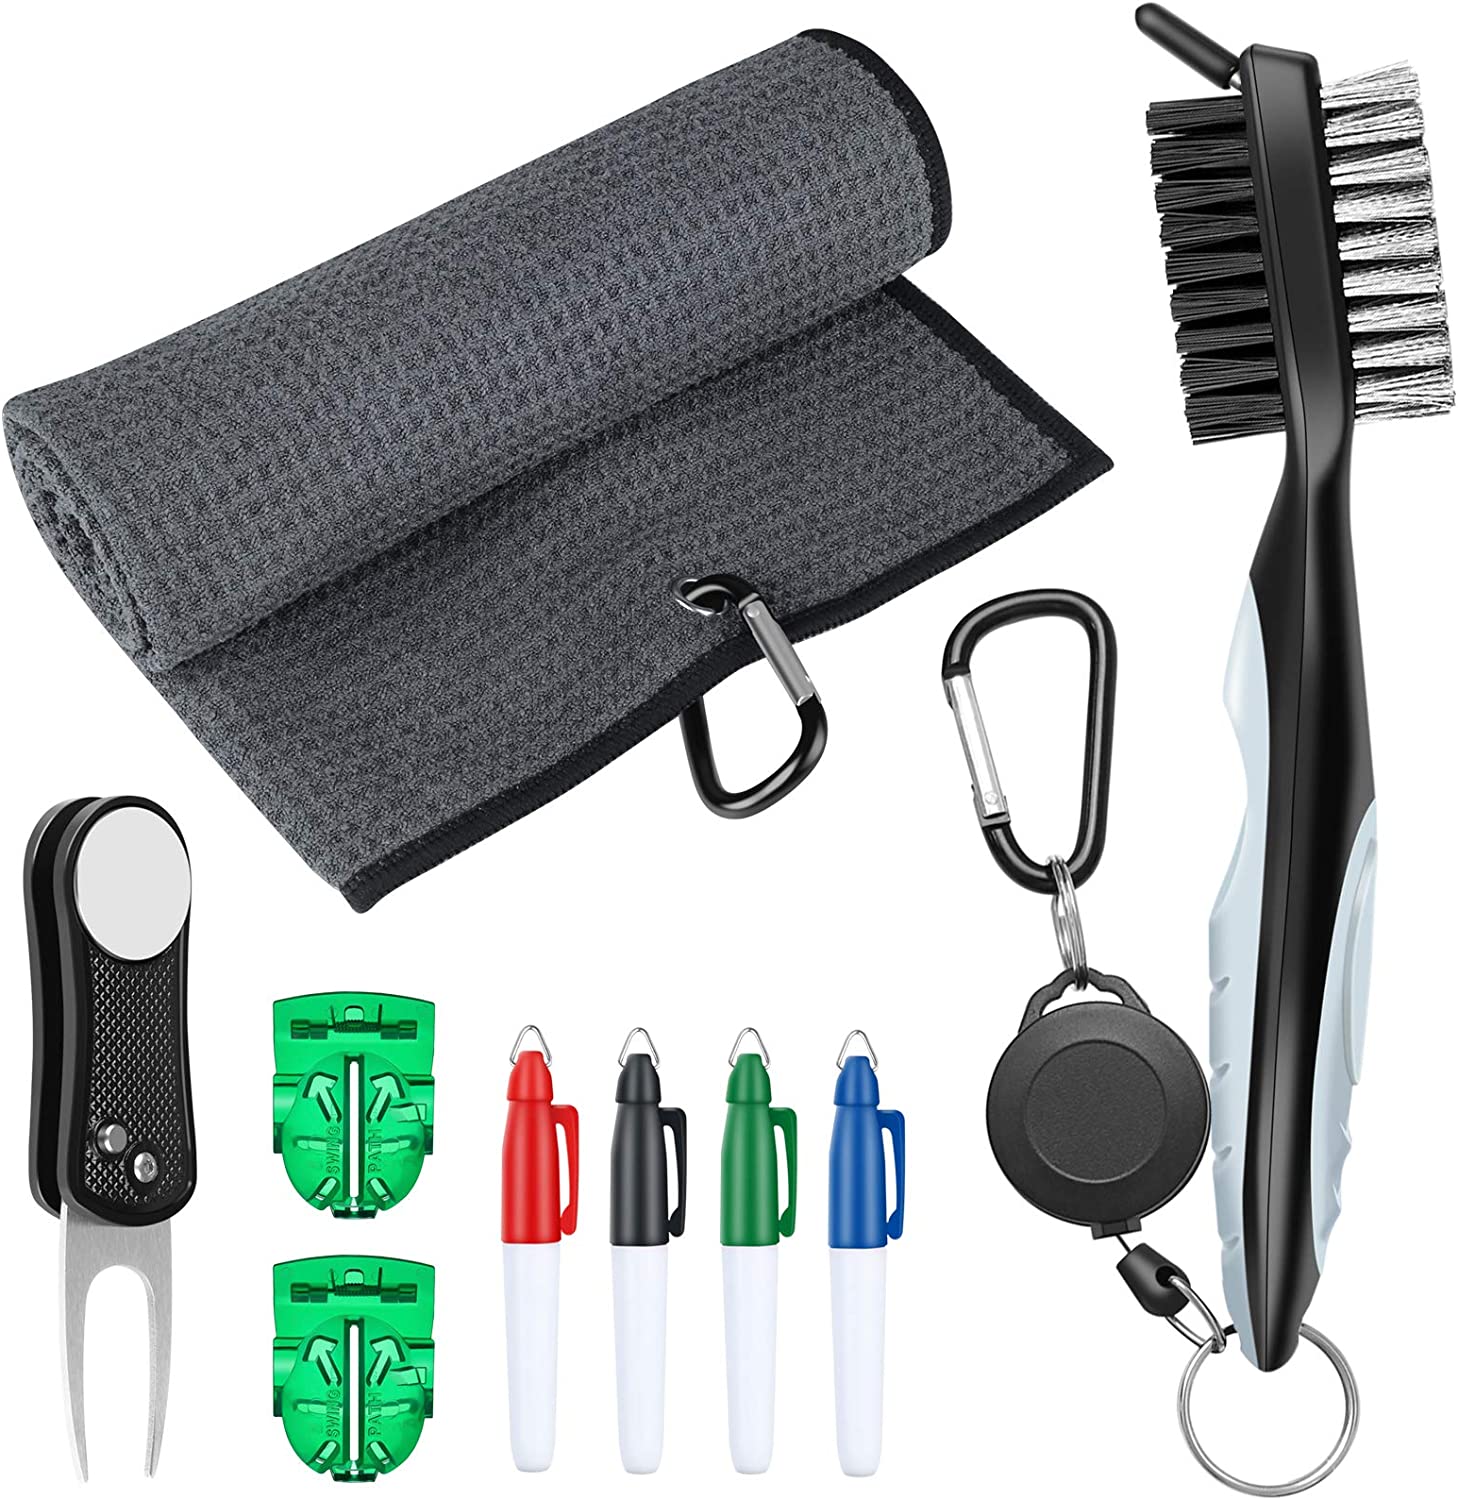 XAegis GT13 Golf Towel and Brush to Clean Golf Club with Magnet Divot Tool,Golf Ball Liners,Pens - 9 in 1 Golf Accessories